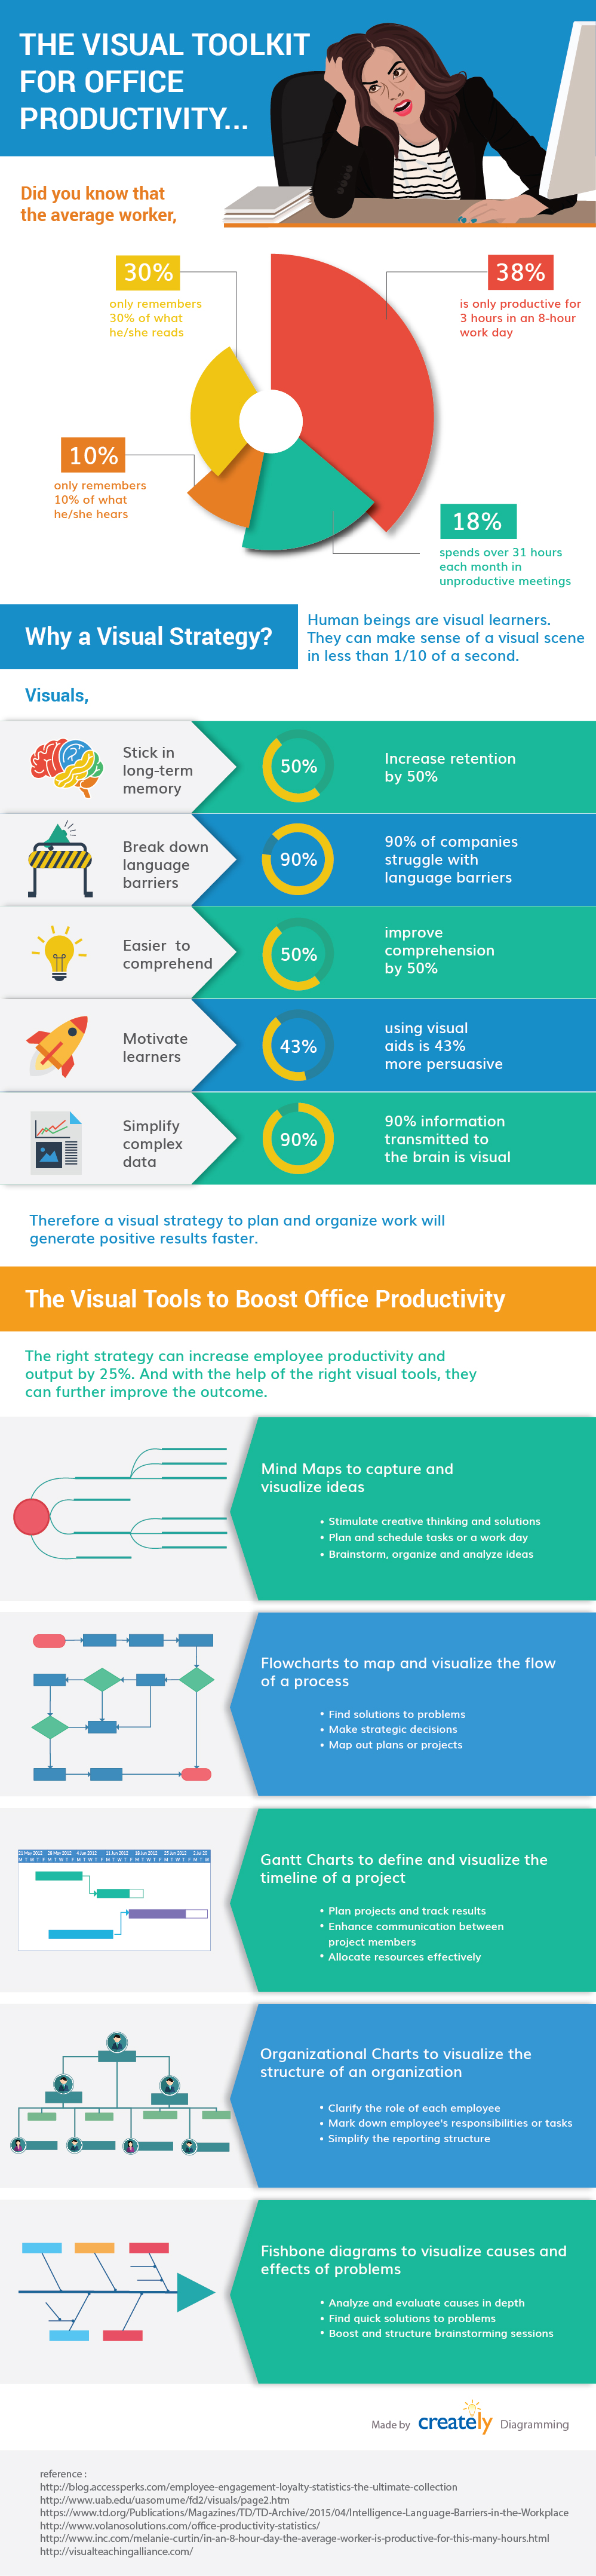 Visual tools to improve office productivity infographic